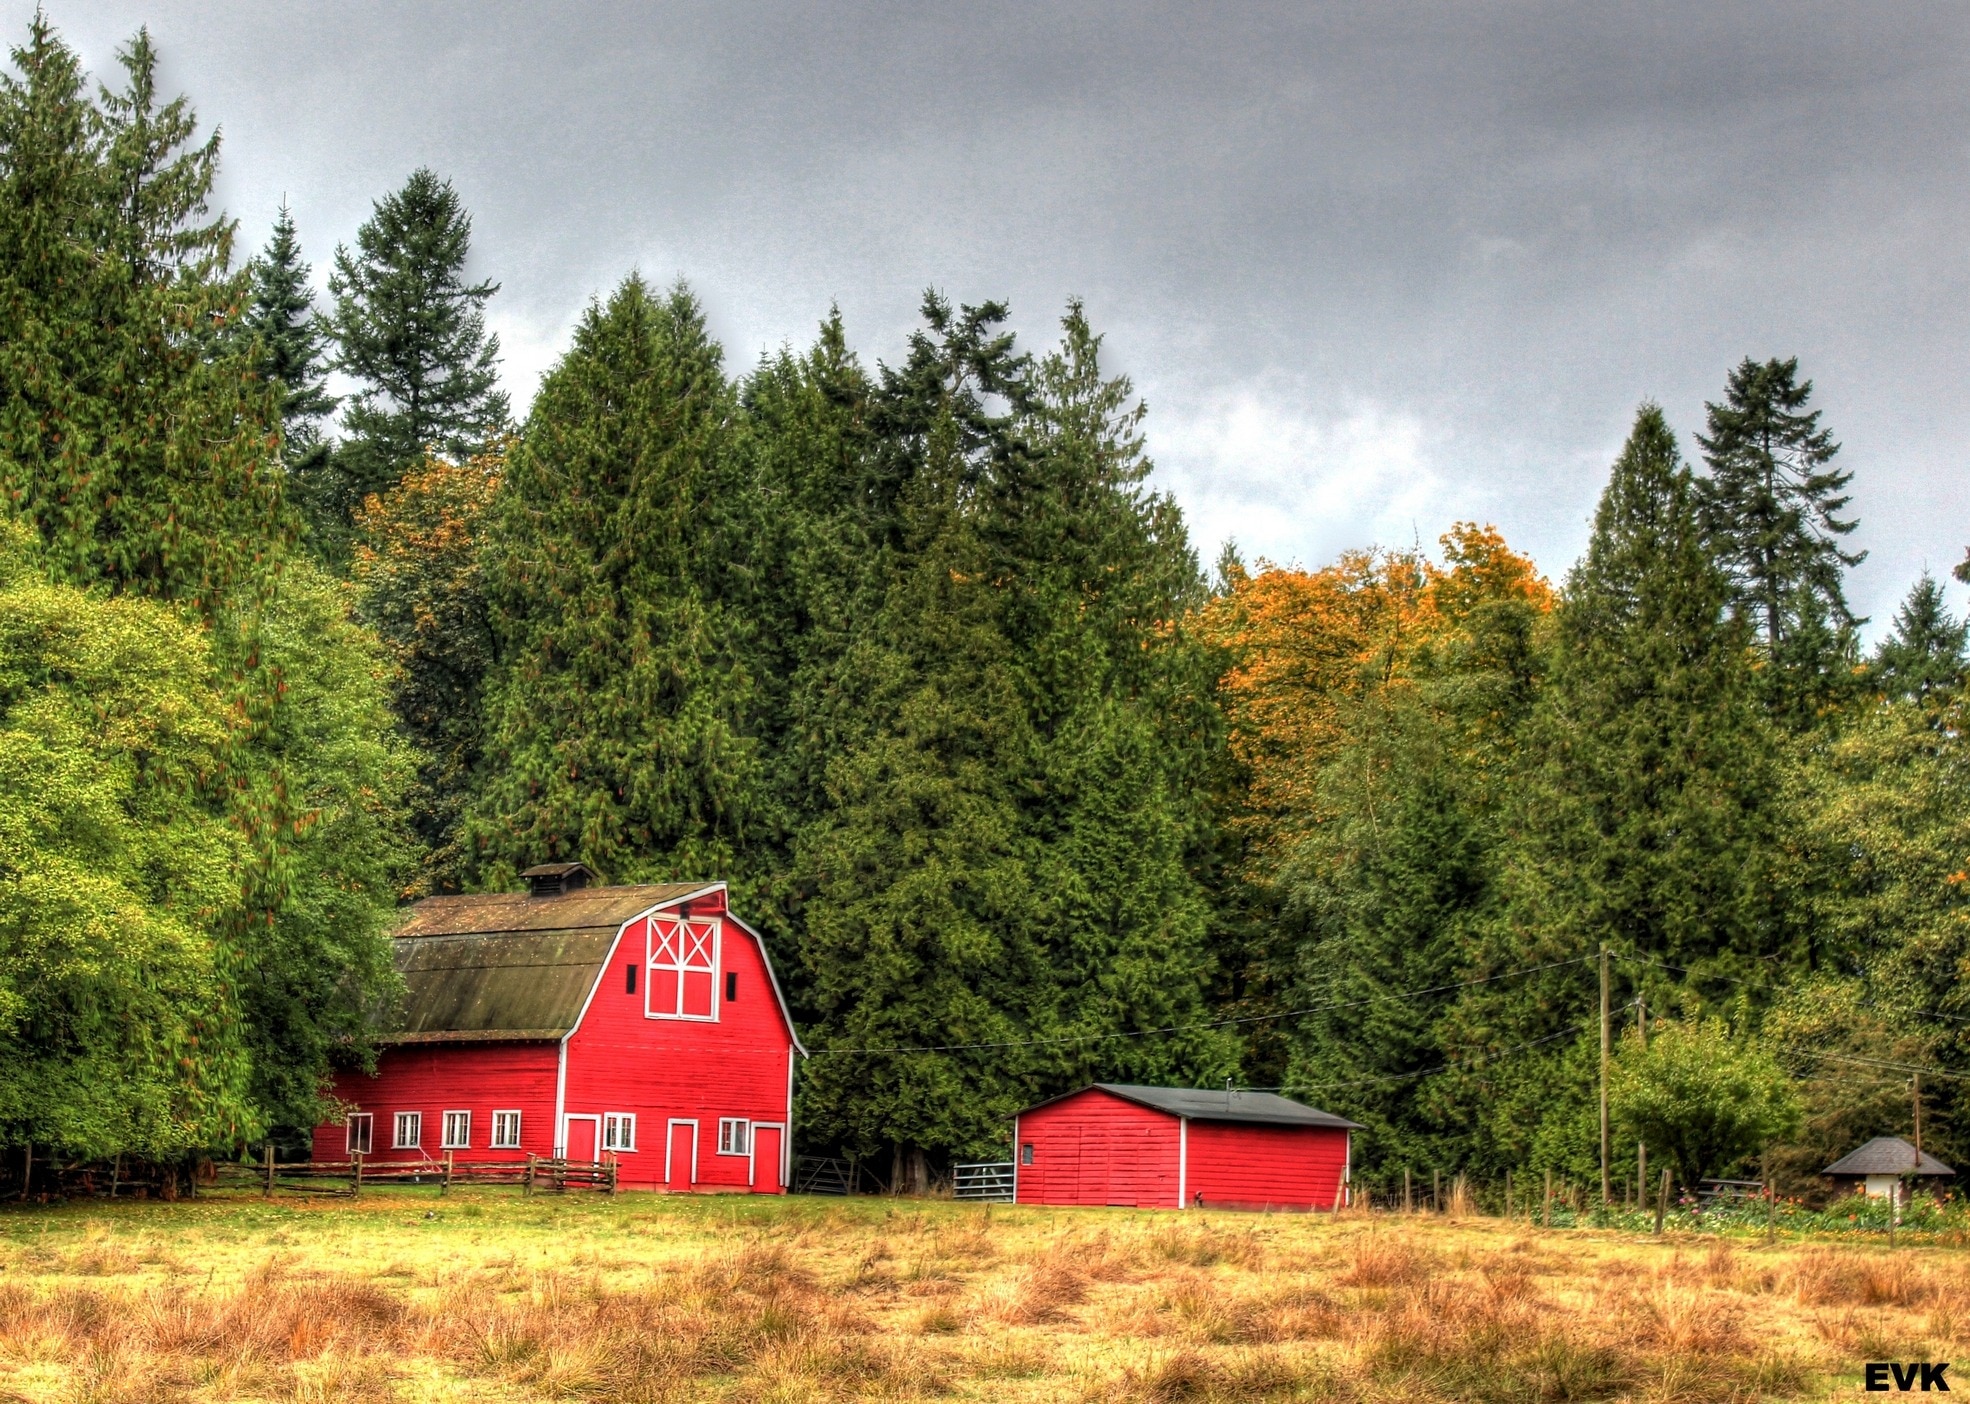 red and white barn house between trees under cloudy sky